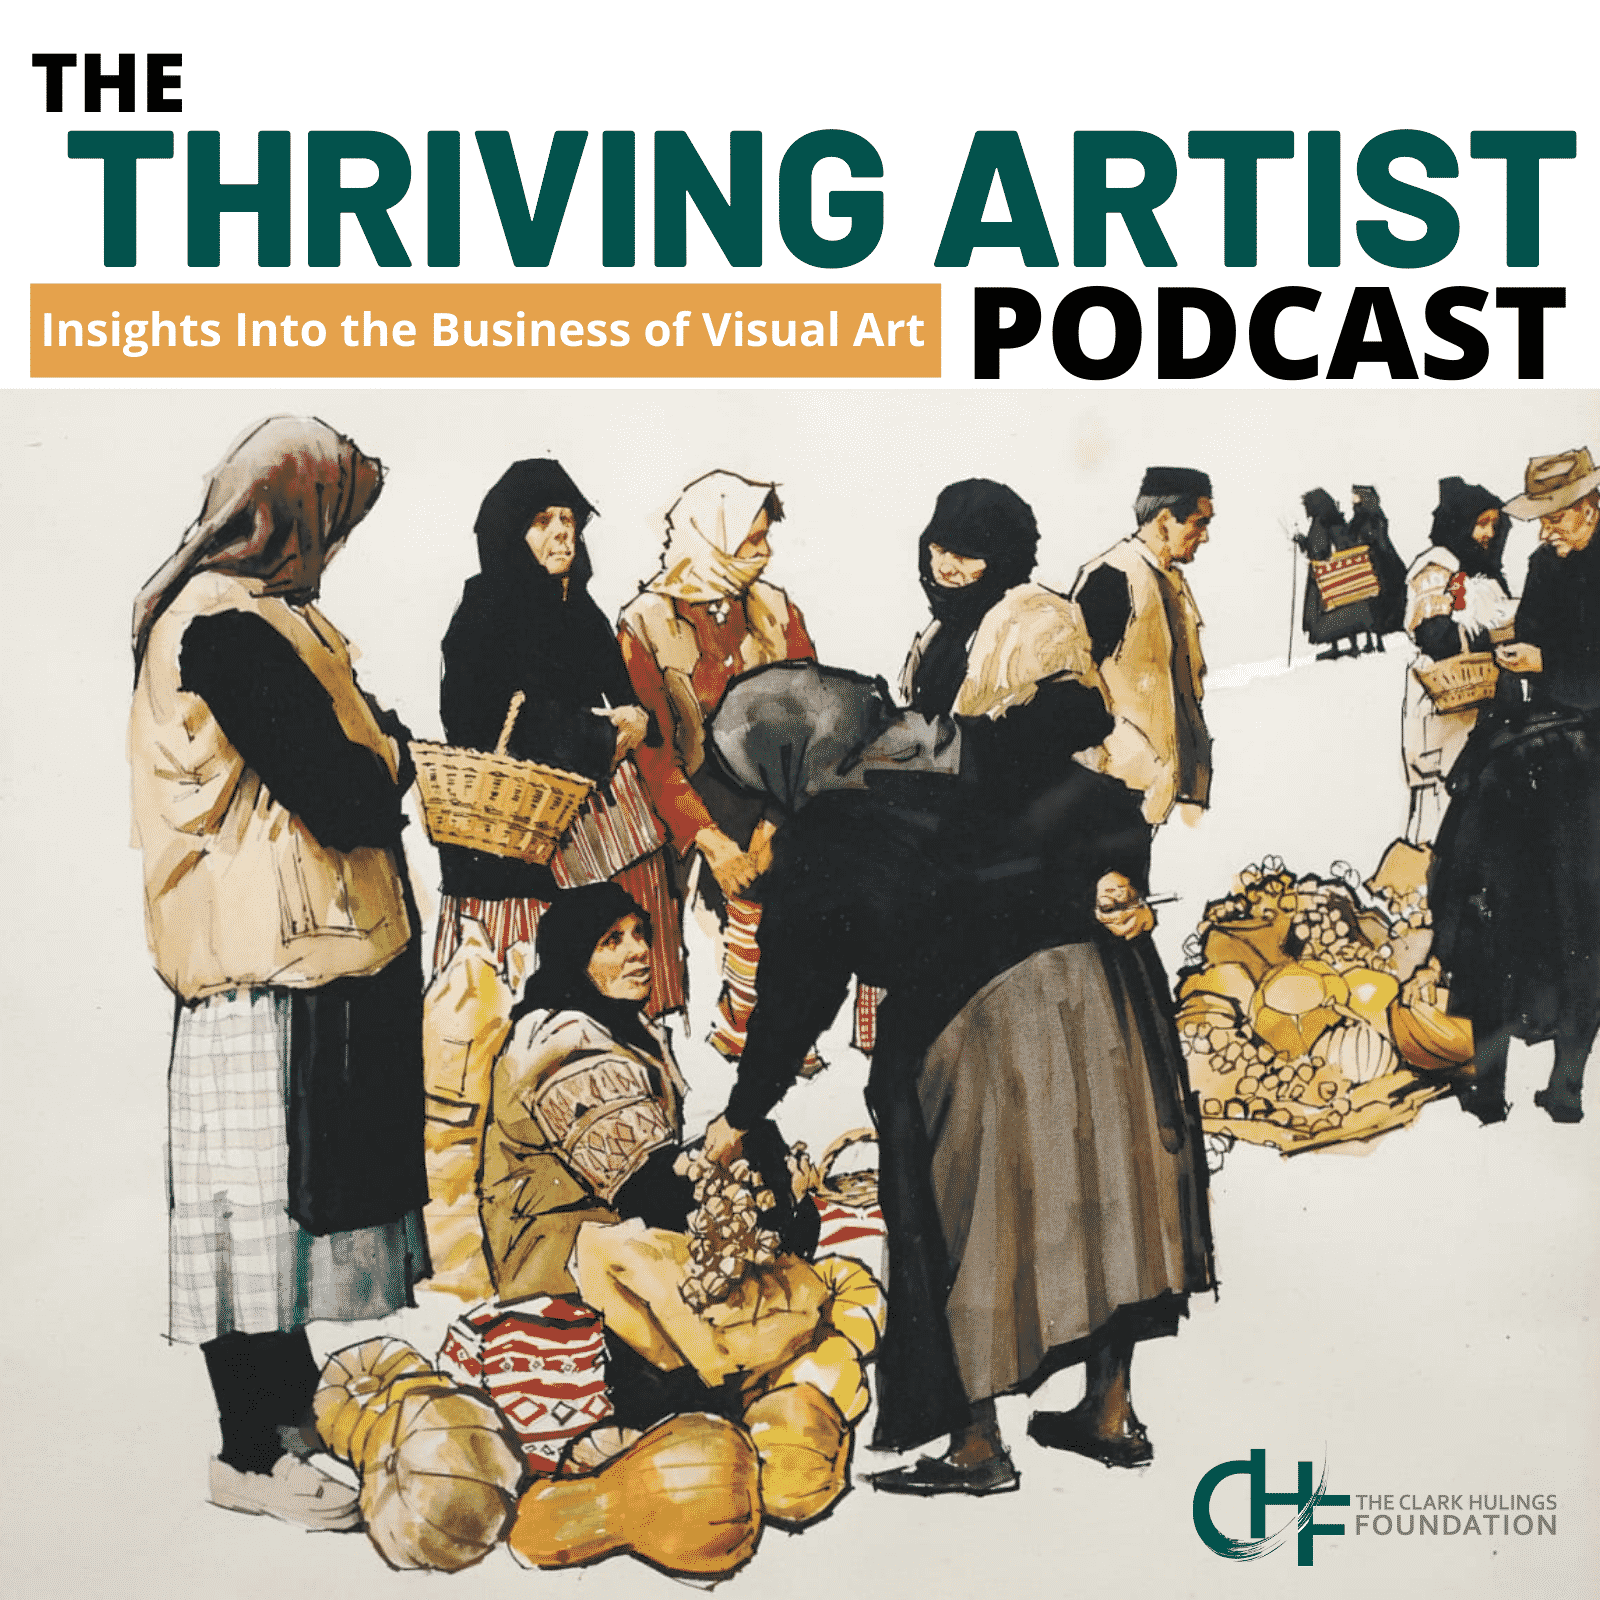 The Thriving Artist Podcast